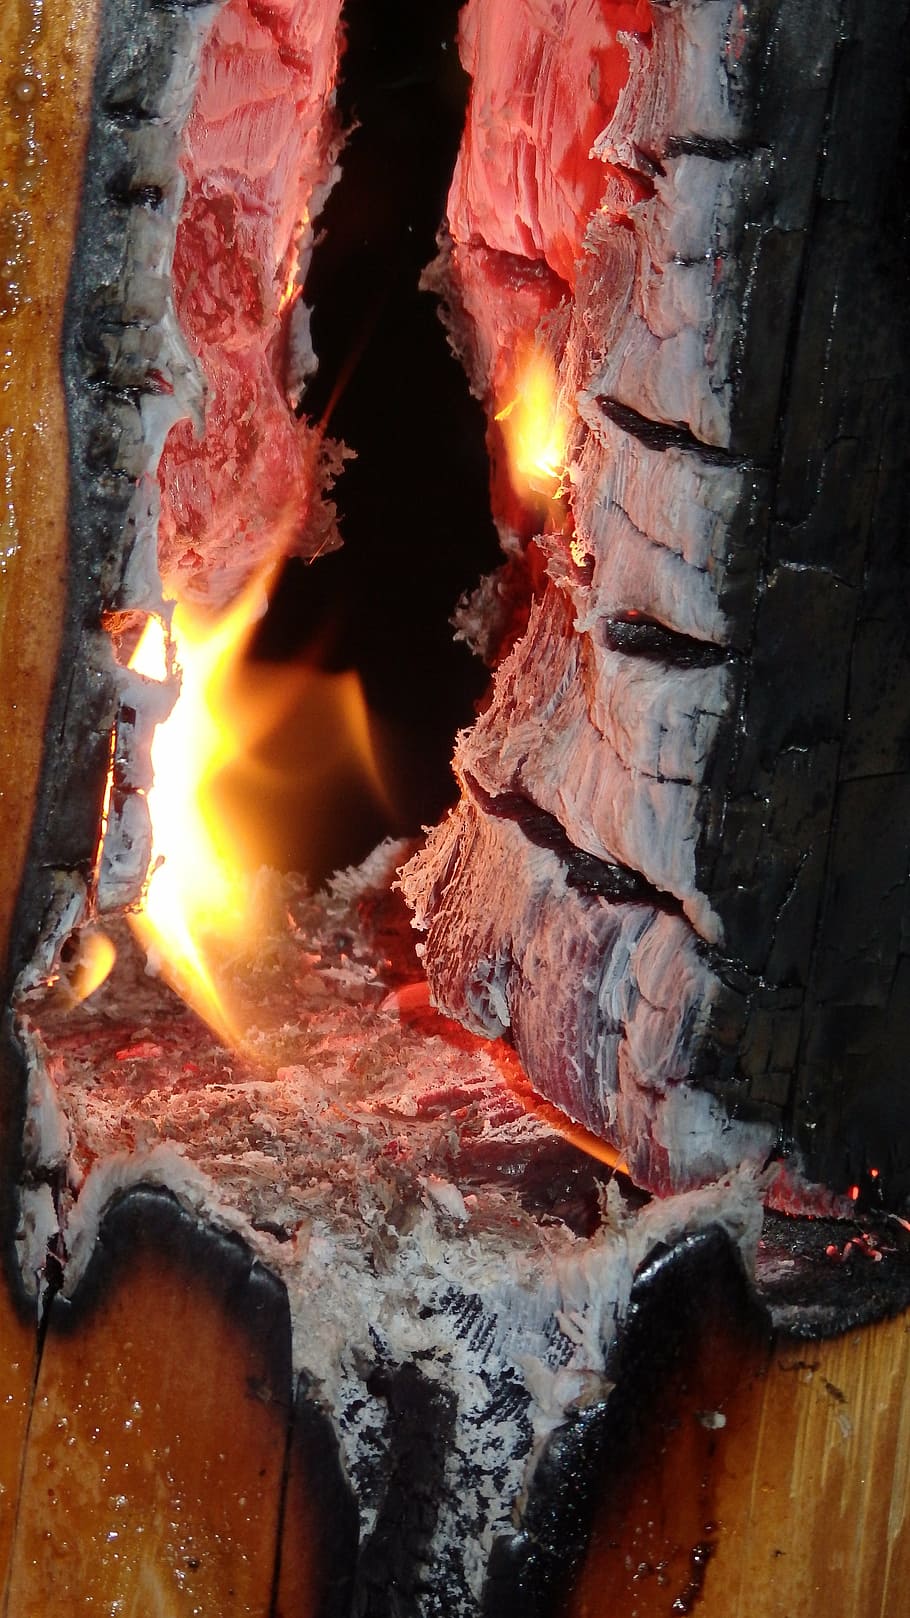 tree torch, fire, mood, fire - Natural Phenomenon, flame, heat - Temperature, burning, fireplace, close-up, firewood